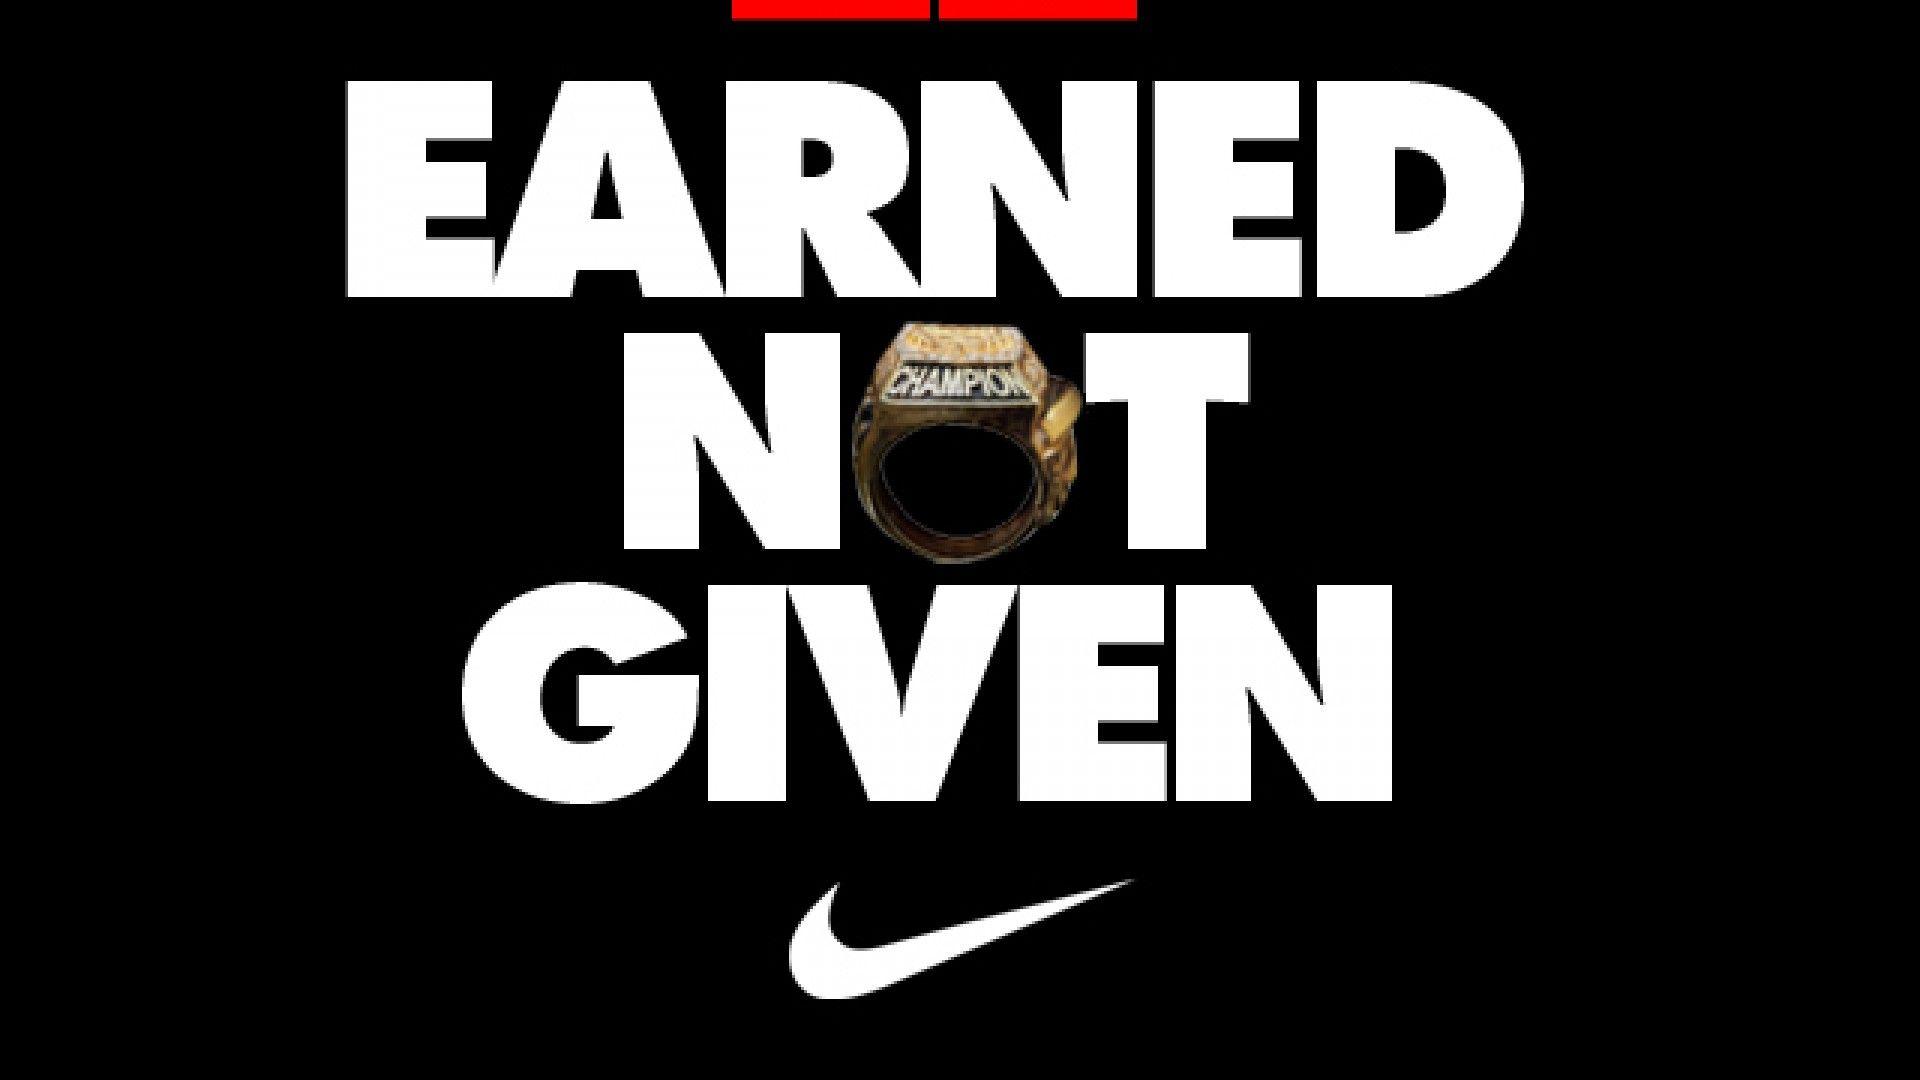 nike quotes wallpaper iphone